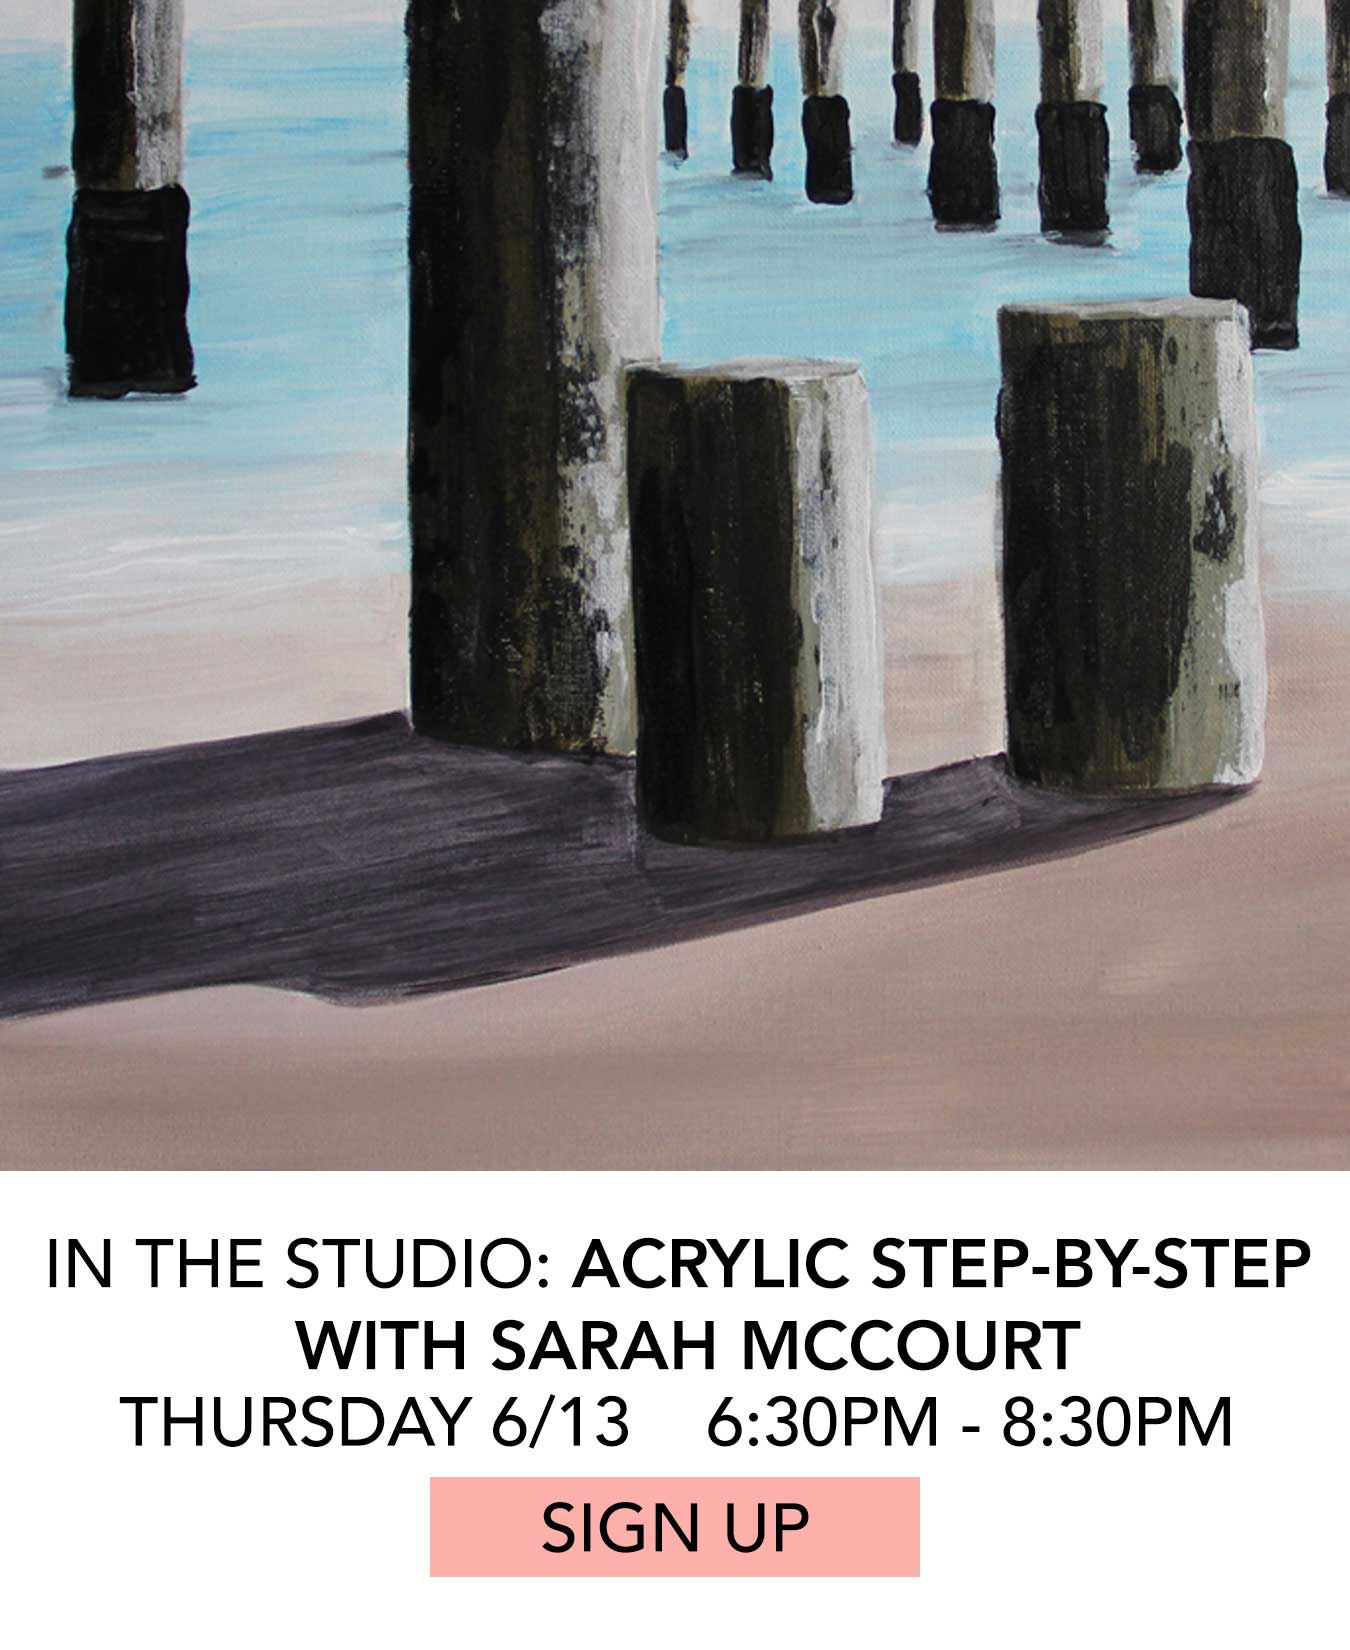 In the Studio: Acrylic Step-by-Step with Sarah McCourt. Thursday 6/13 from 6:30pm to 8:30pm. Click to Sign Up.